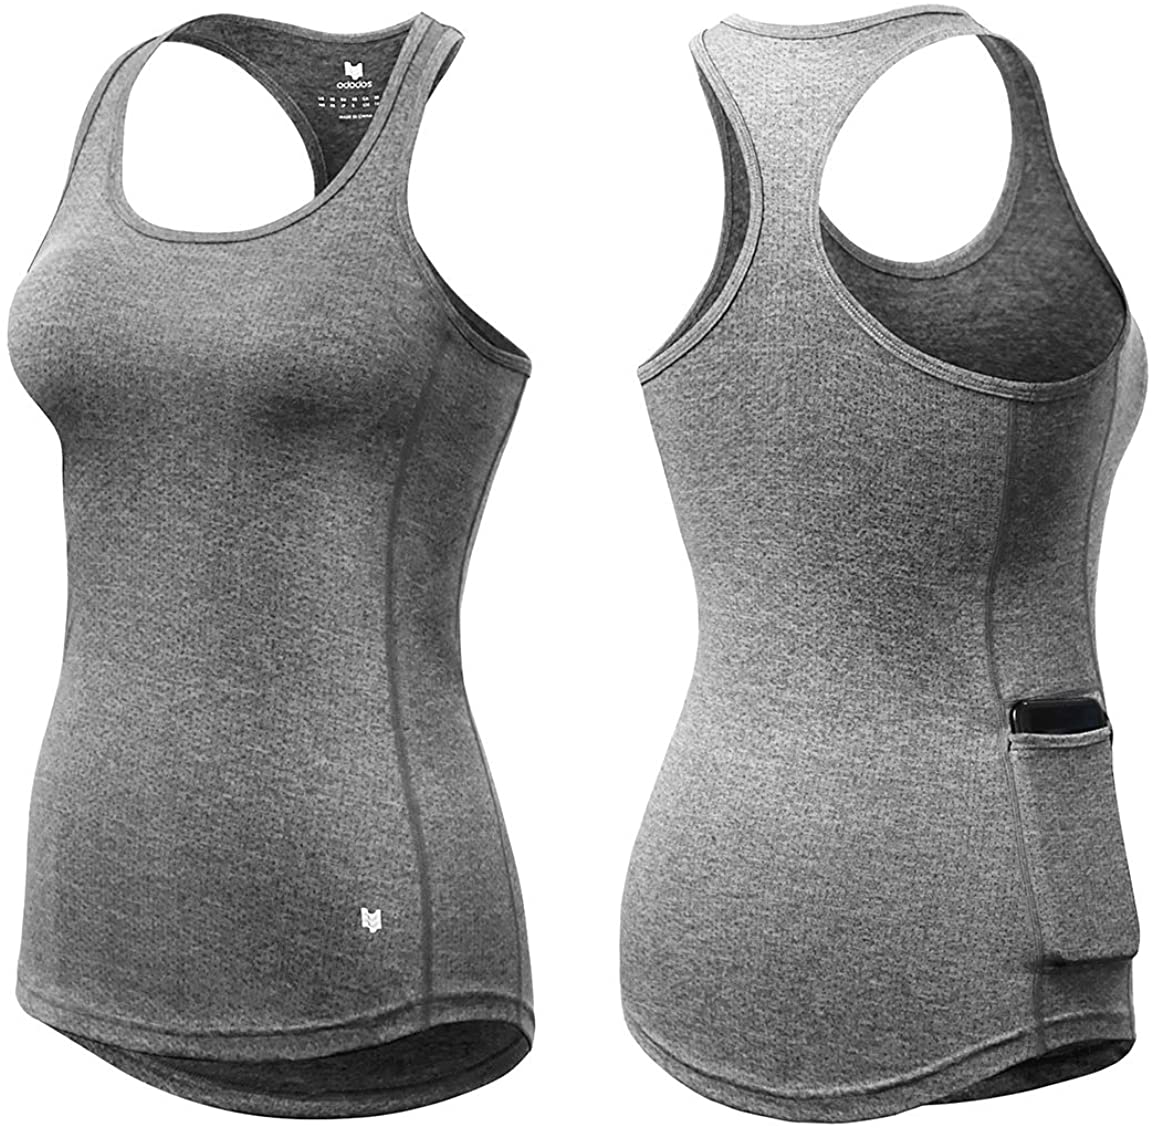 Strappy Athletic Tanks with Side Pocket Exercise Gym Yoga Shirts ODODOS Workout Tank Tops for Women